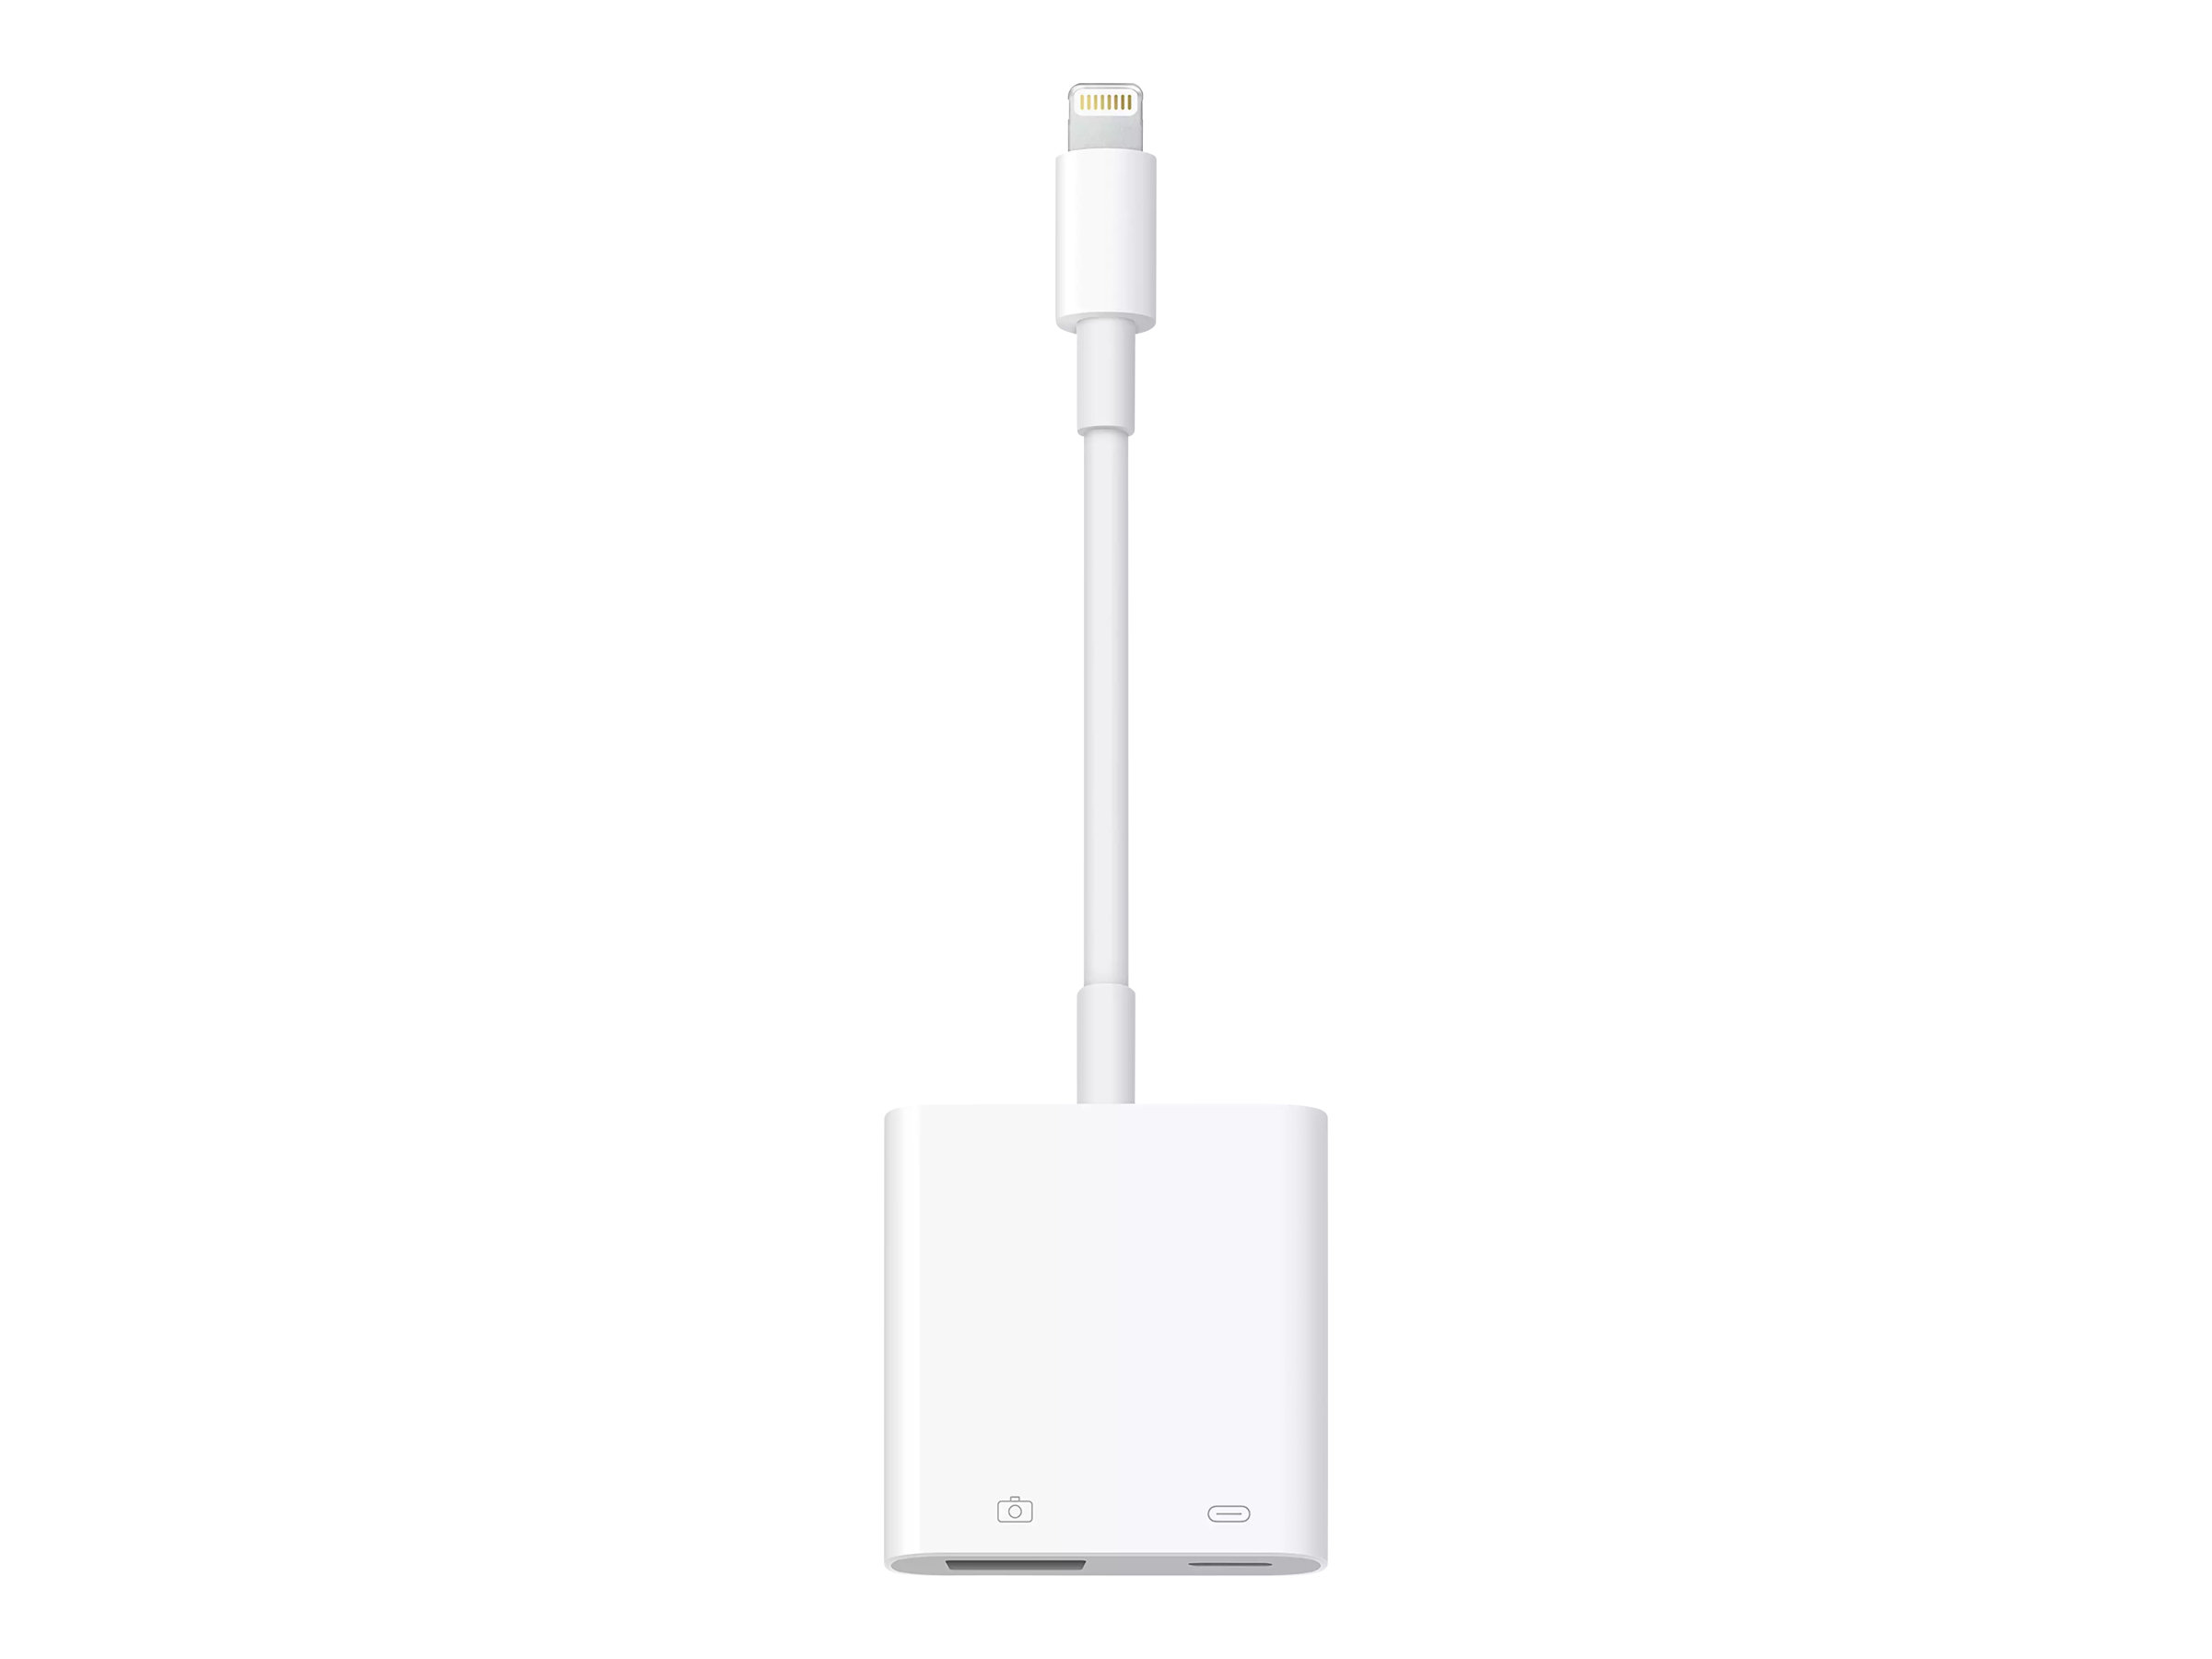 Apple Lightning to USB 3 Camera Adapter - Adaptateur Lightning - Lightning mâle pour USB, Lightning femelle - MK0W2ZM/A - Accessoires pour systèmes audio domestiques